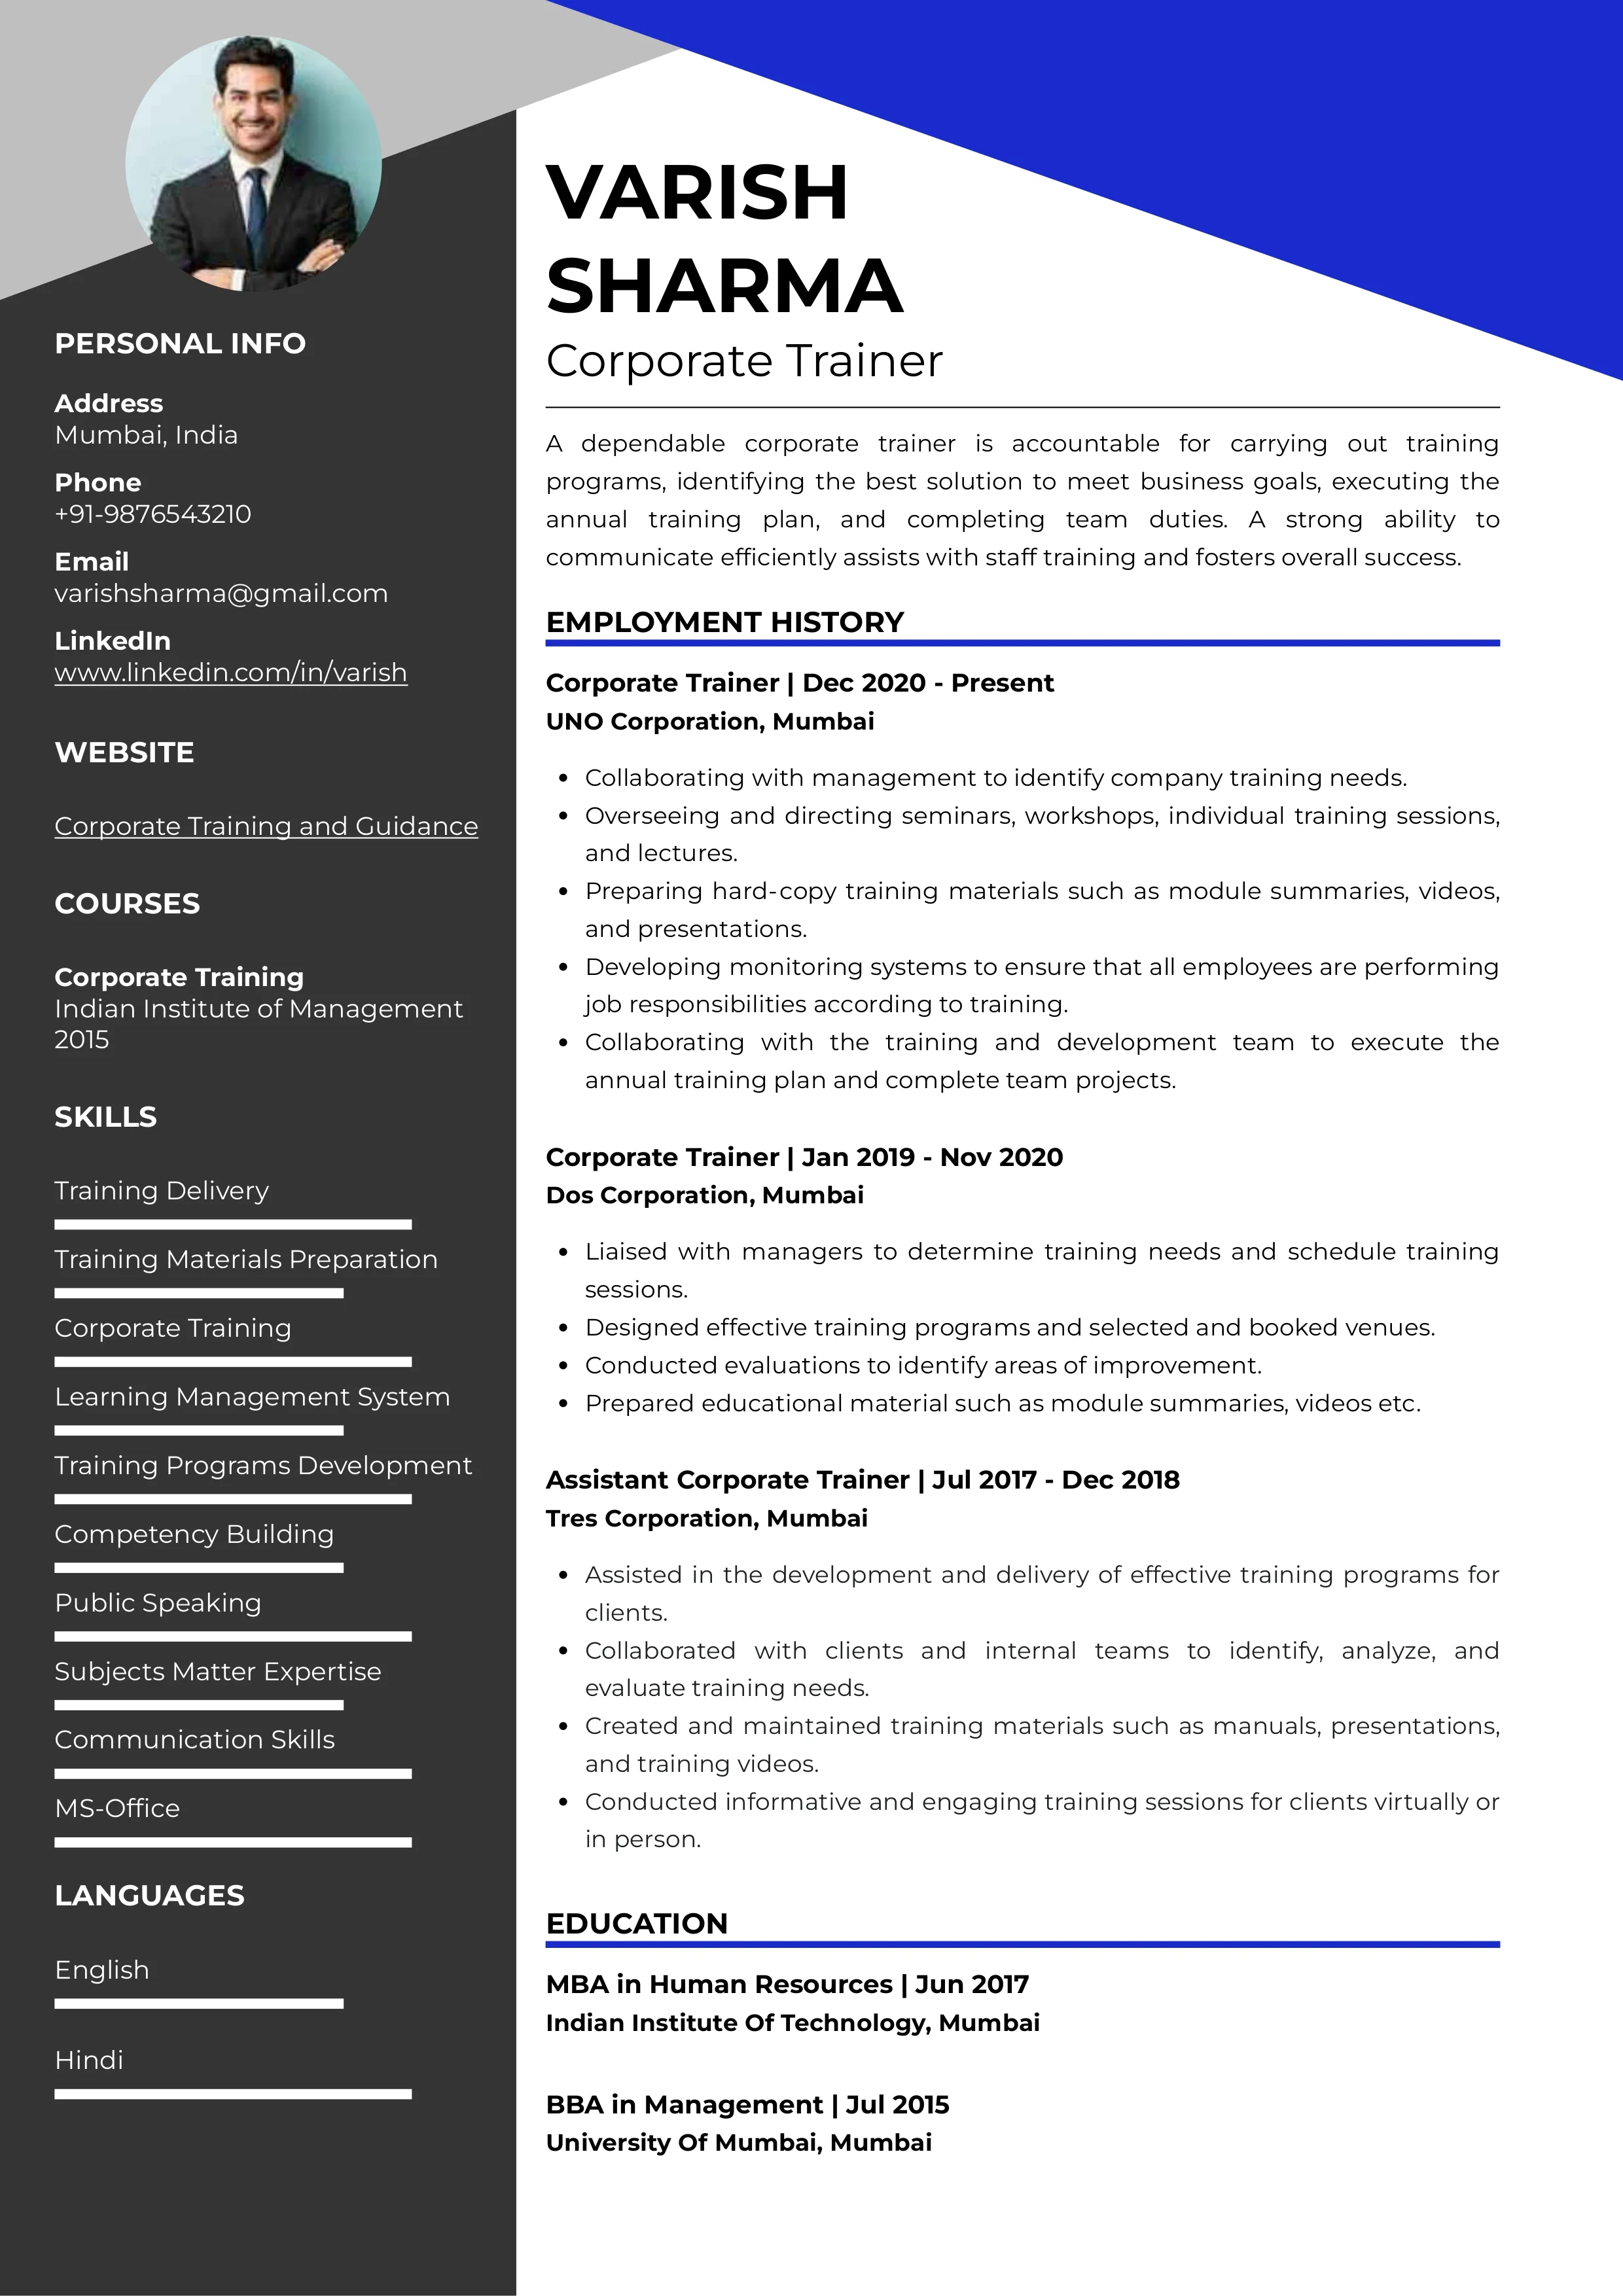 Sample Resume of Corporate Trainer | Free Resume Templates & Samples on Resumod.co